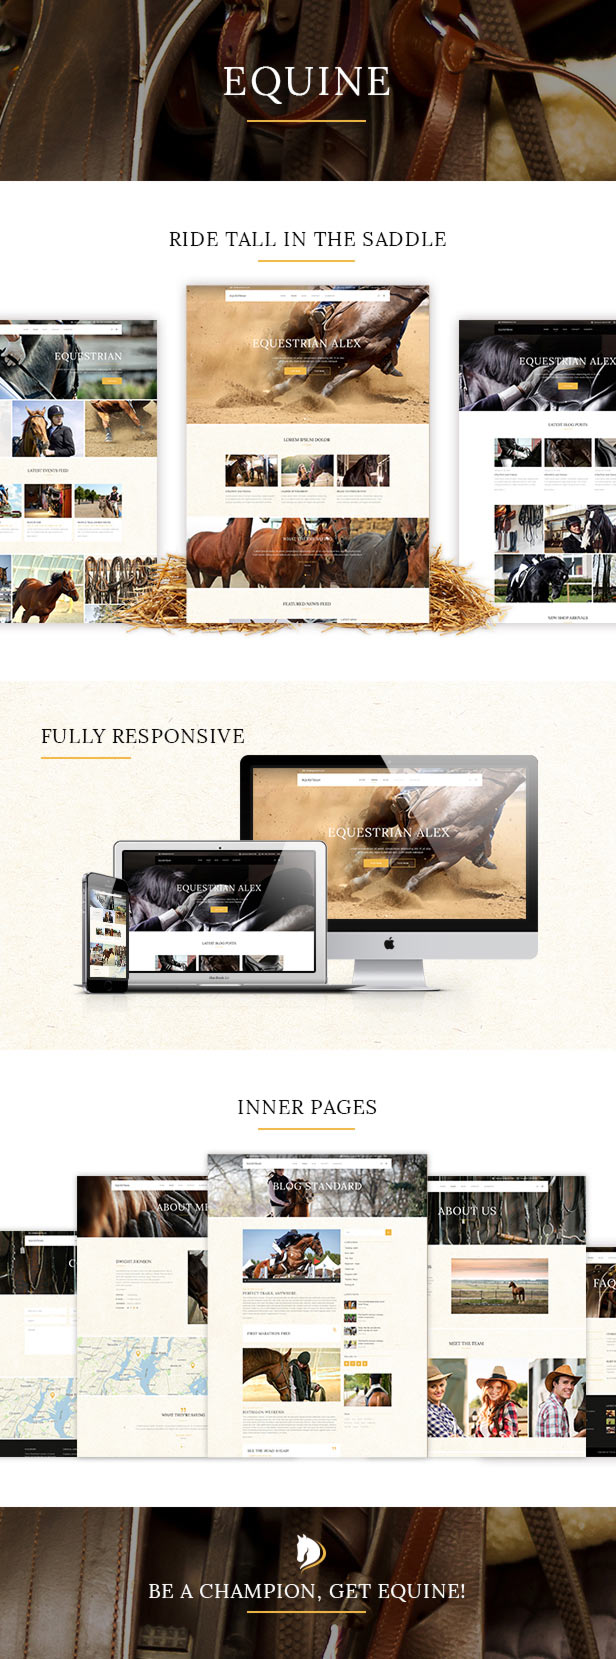 WordPress theme Equine - An Equestrian and Horse Riding Club Theme (Miscellaneous)